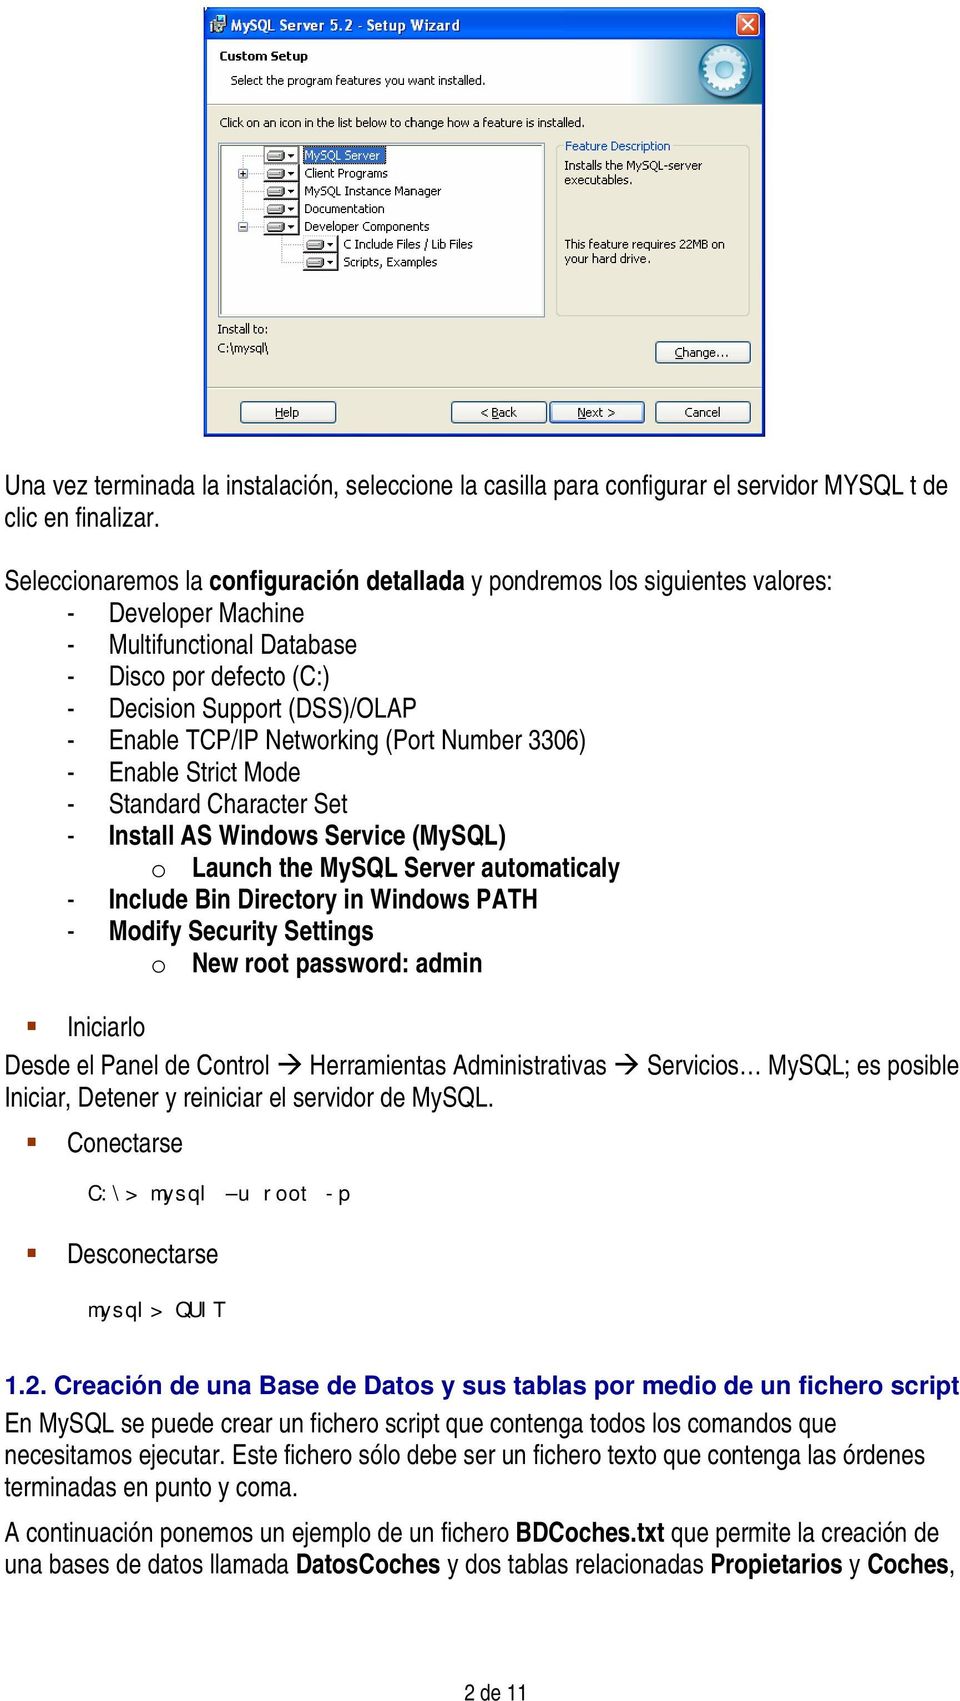 Networking (Port Number 3306) - Enable Strict Mode - Standard Character Set - Install AS Windows Service (MySQL) o Launch the MySQL Server automaticaly - Include Bin Directory in Windows PATH -